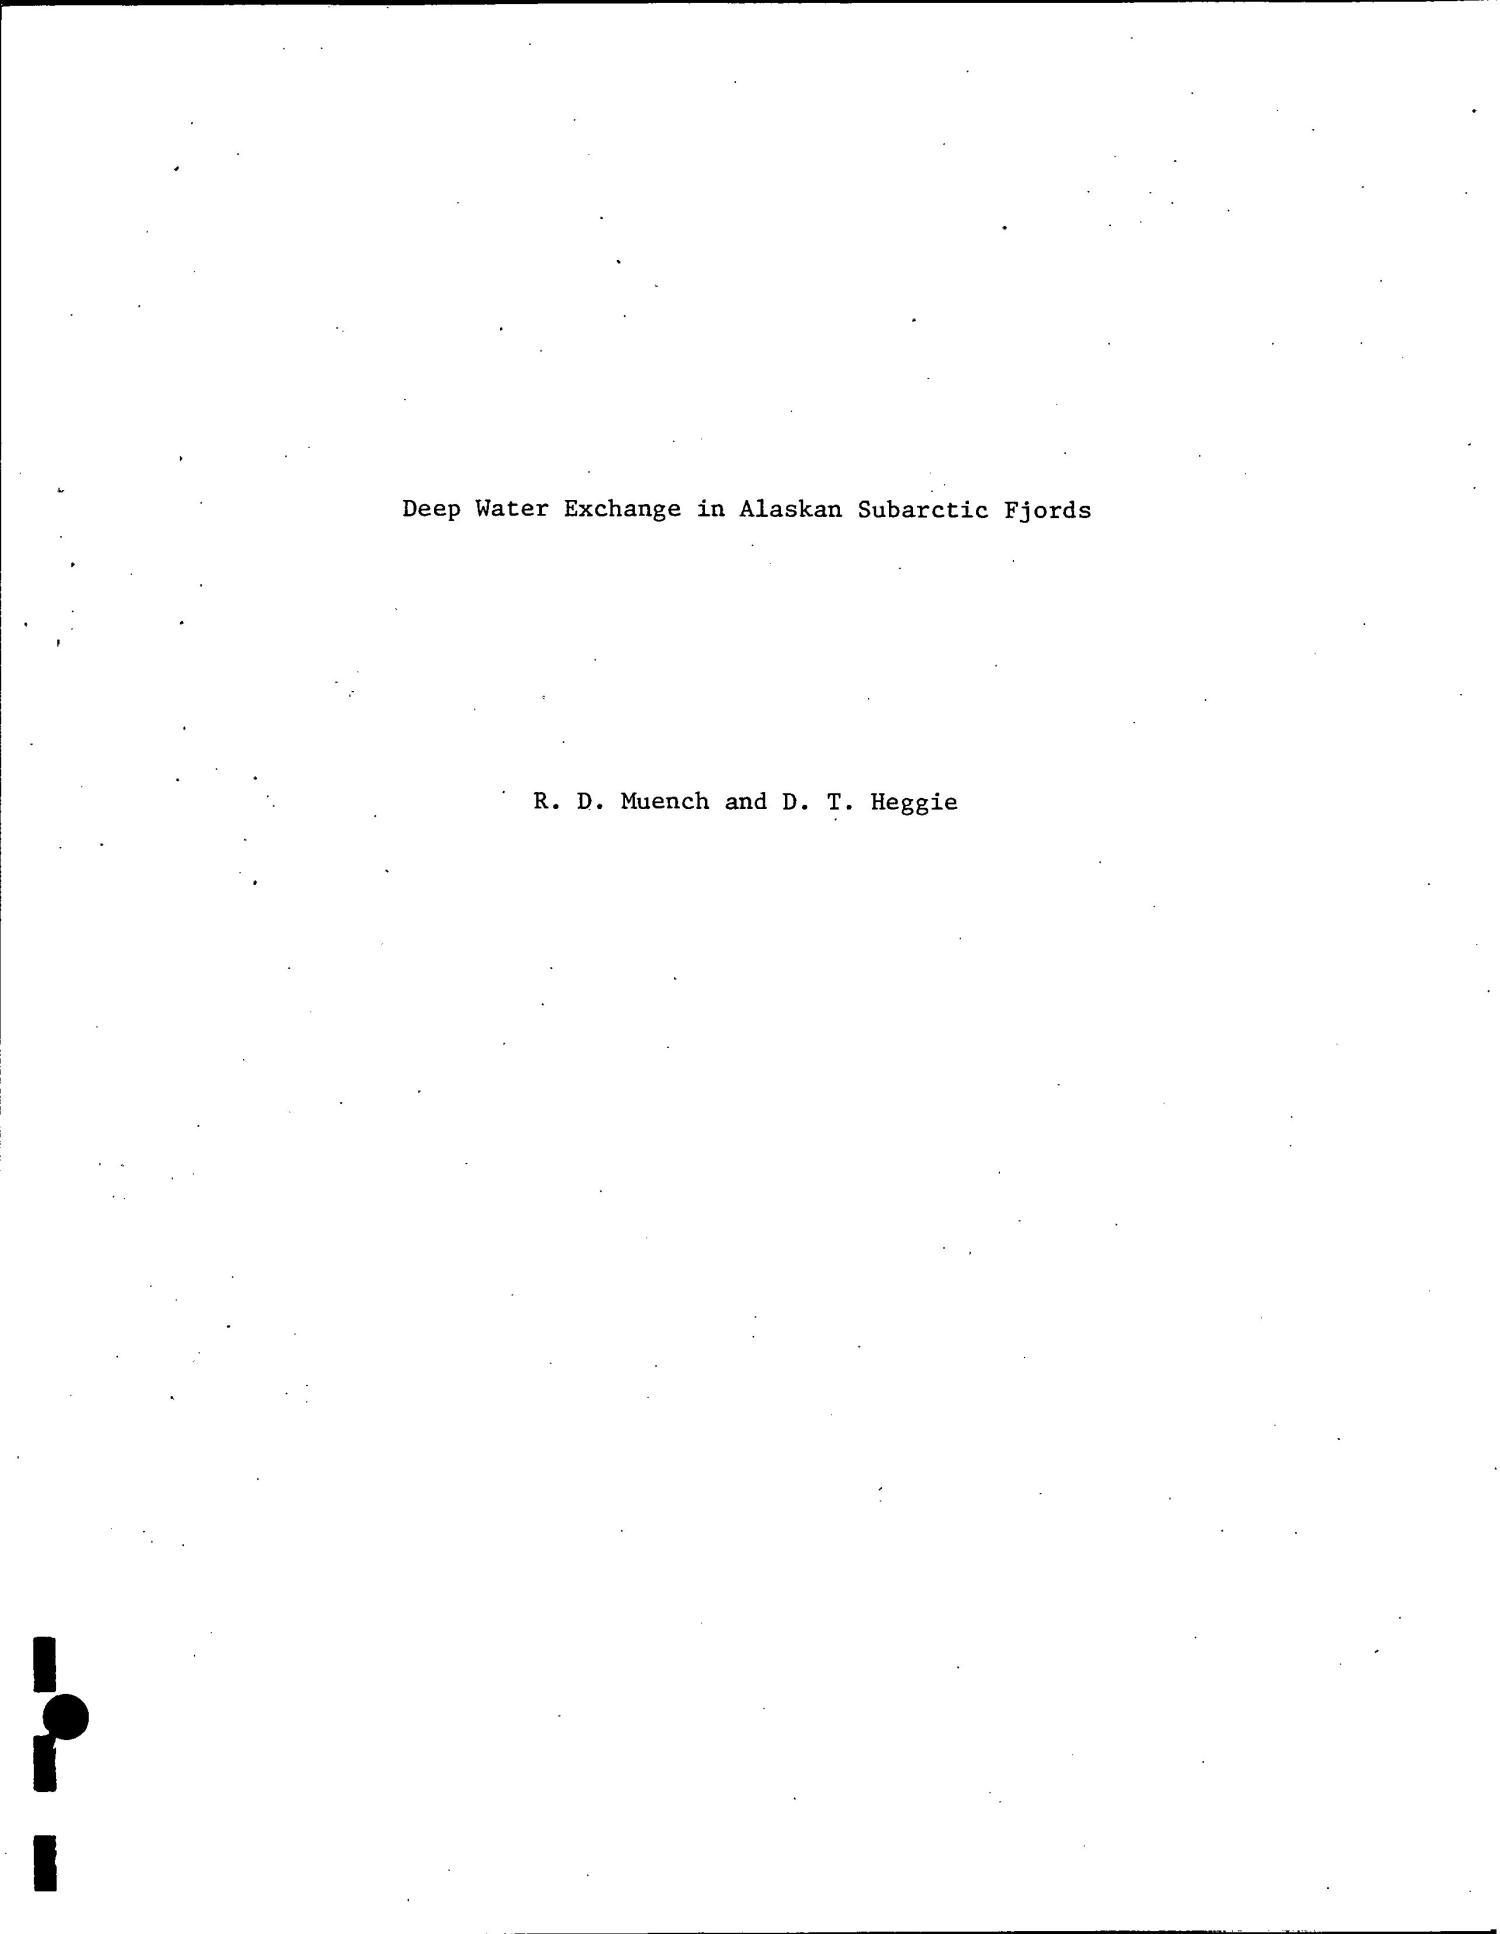 Transport and Reaction of Heavy Metals in Alaskan Fjord-Estuaries. Annual Report, July 1, 1978-June 30, 1979
                                                
                                                    [Sequence #]: 45 of 126
                                                